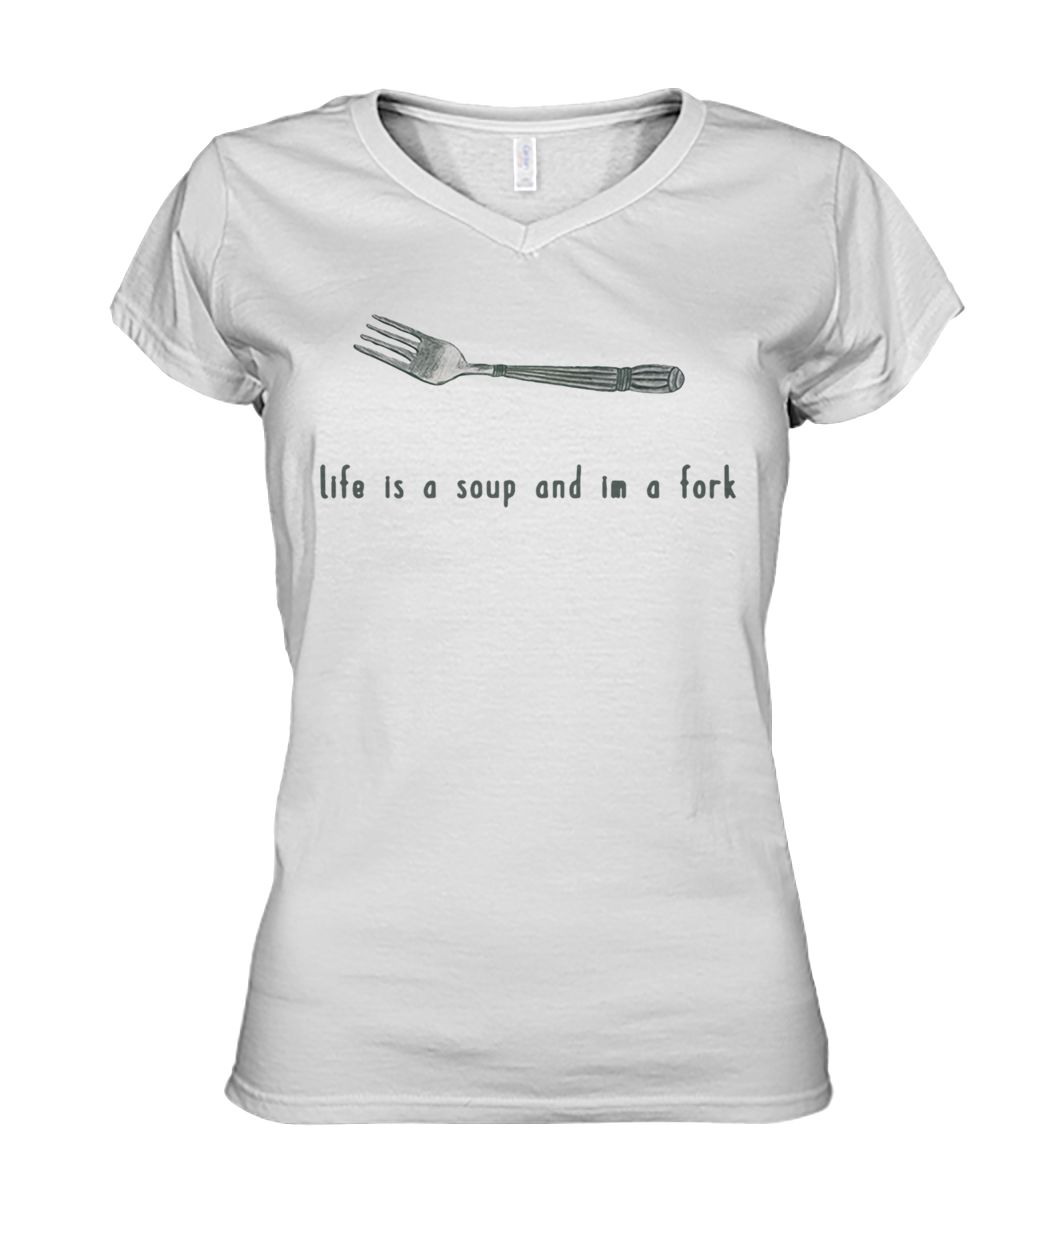 Life is a soup and I'm a fork women's v-neck